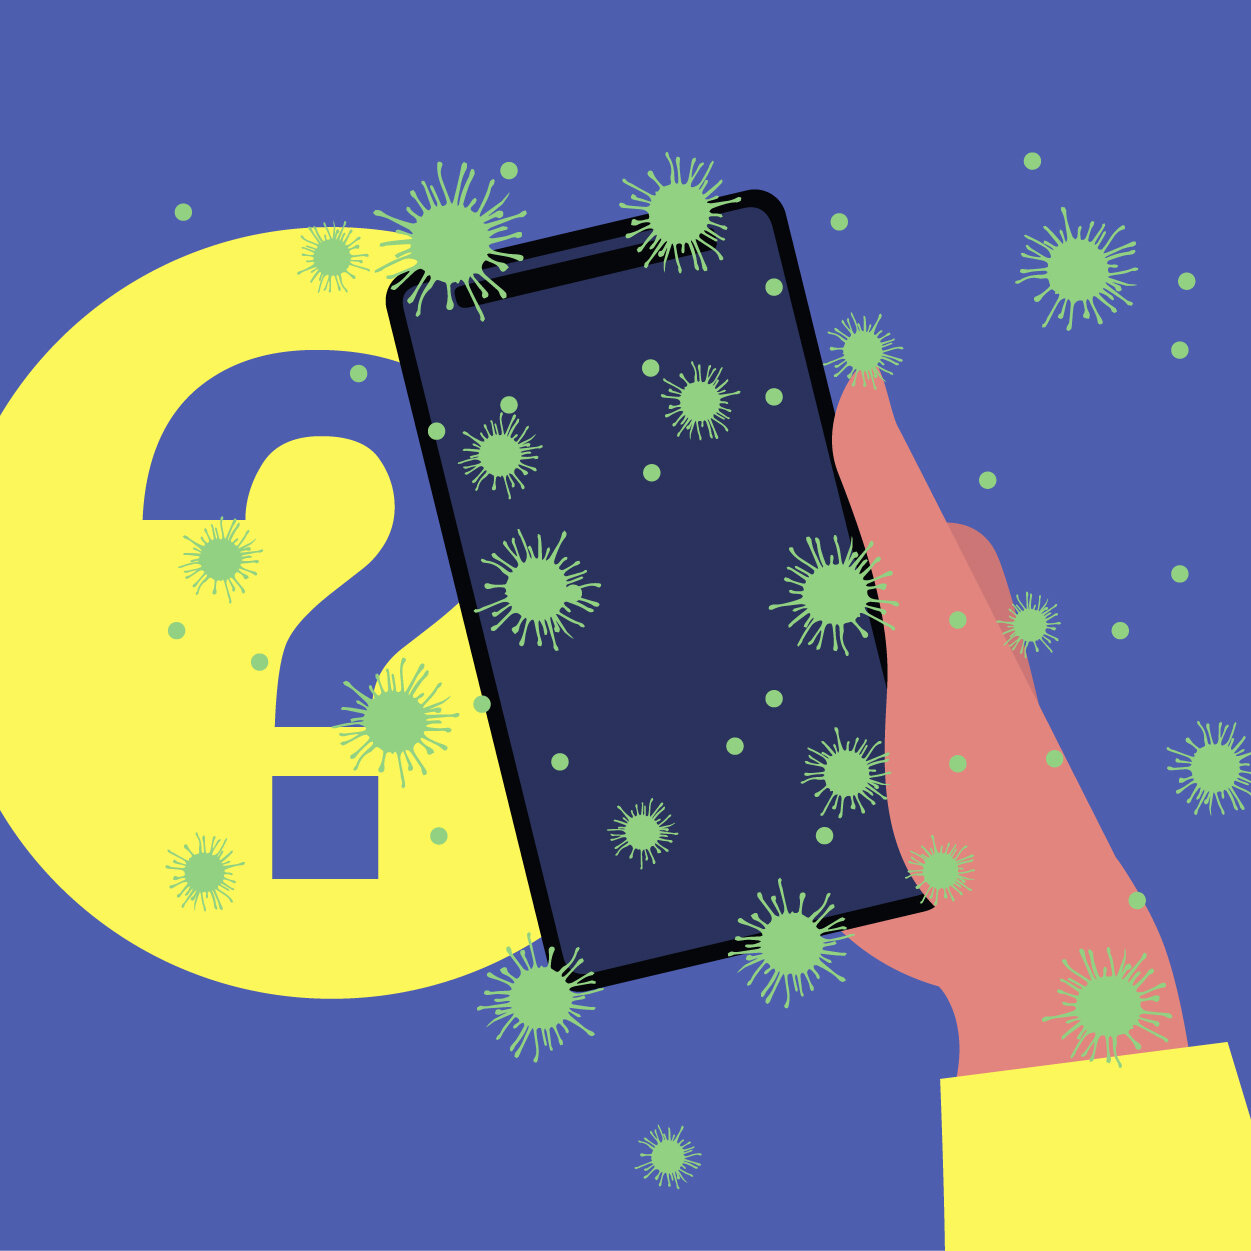 How Dirty Are Our Mobile Phones?